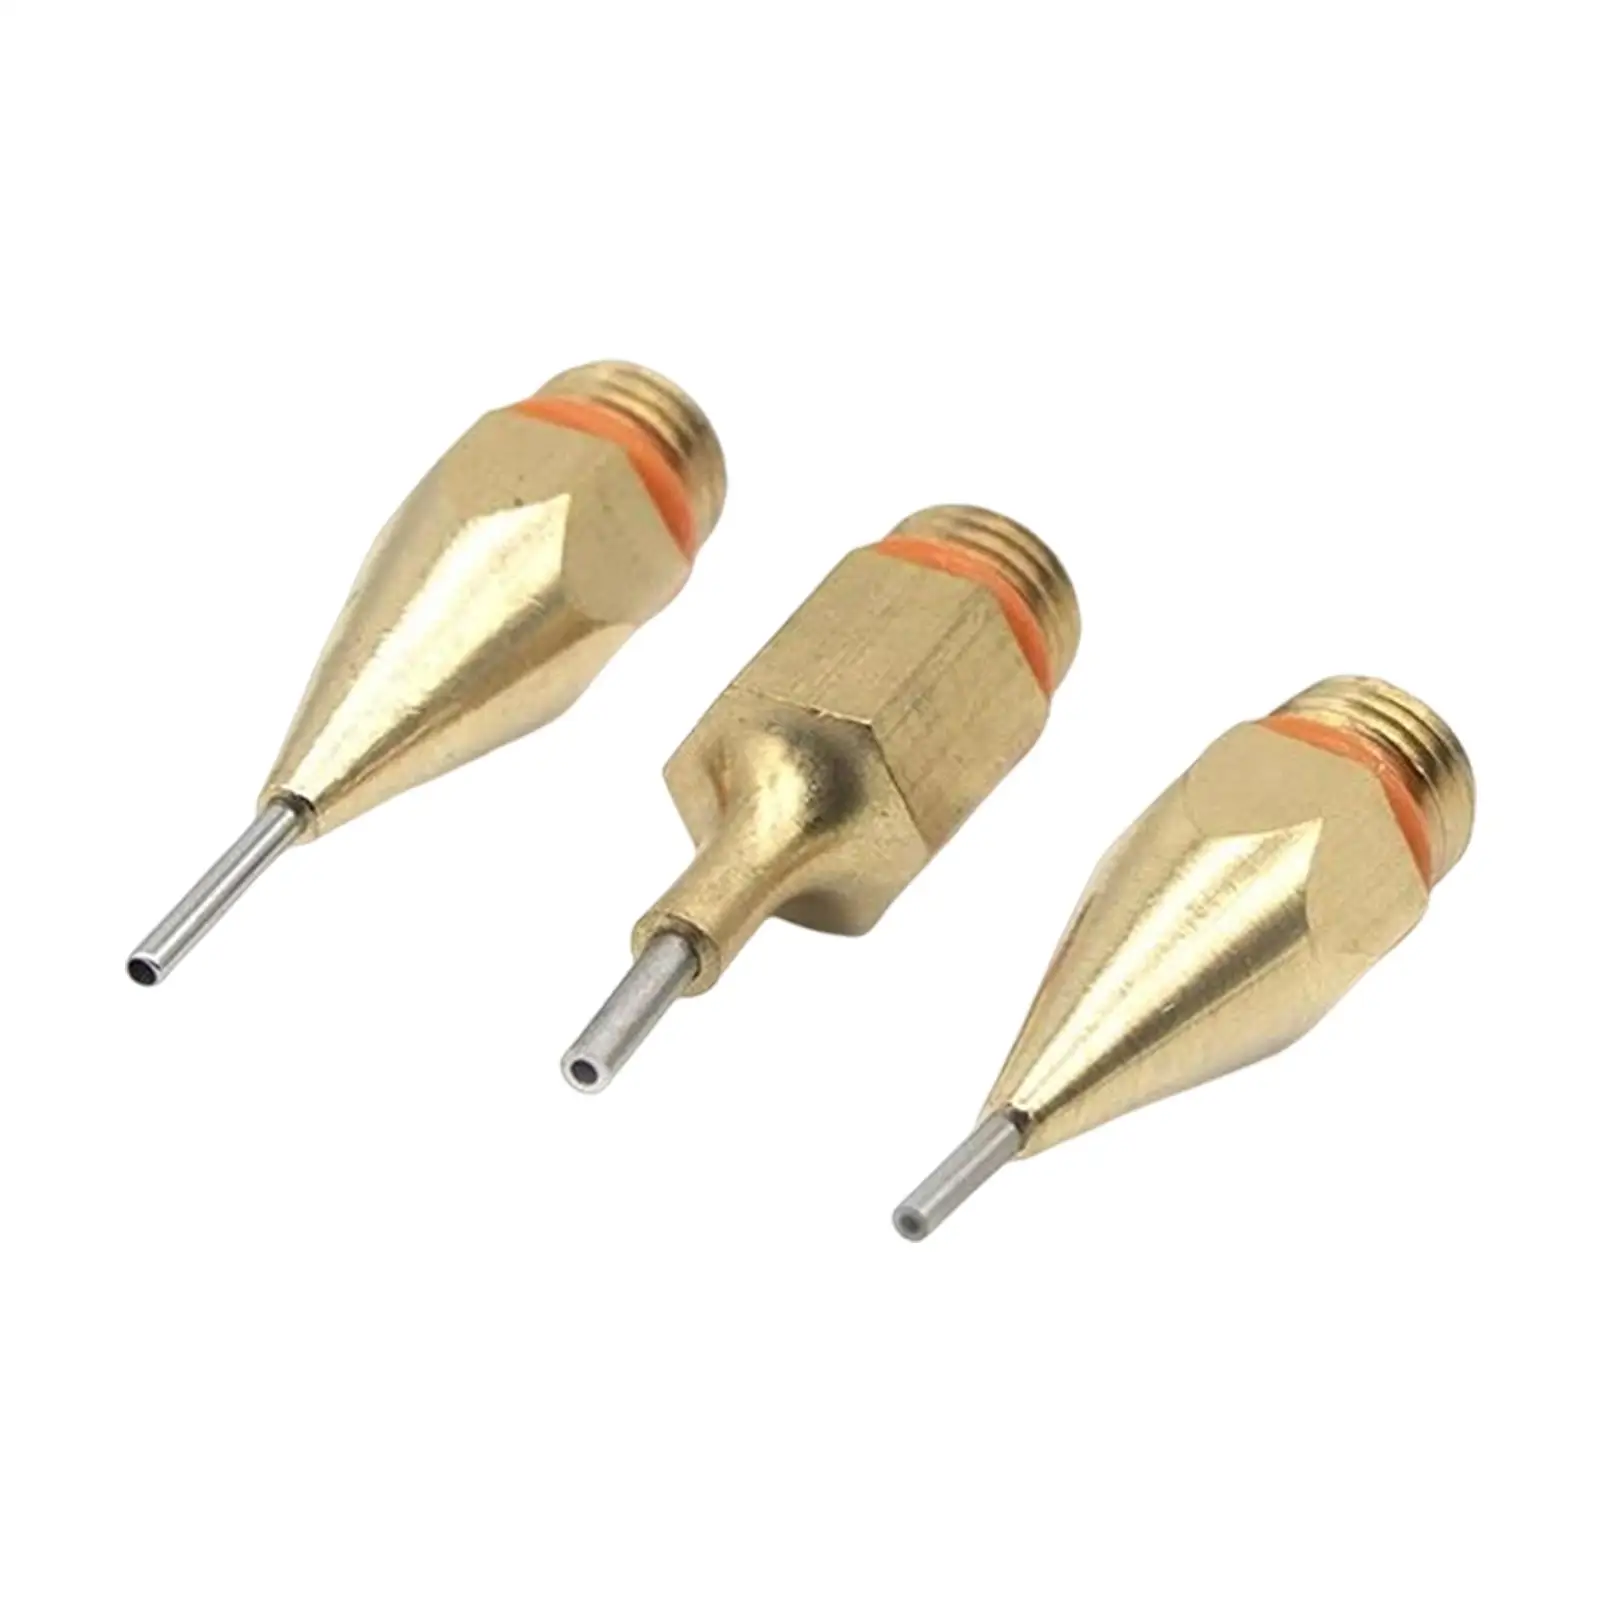 3 Pieces Hot Glue Tool Nozzles Glue Tool Accessories Melting Glue Tool Use Copper Nozzles Craft Repair Tool Stainless Steel